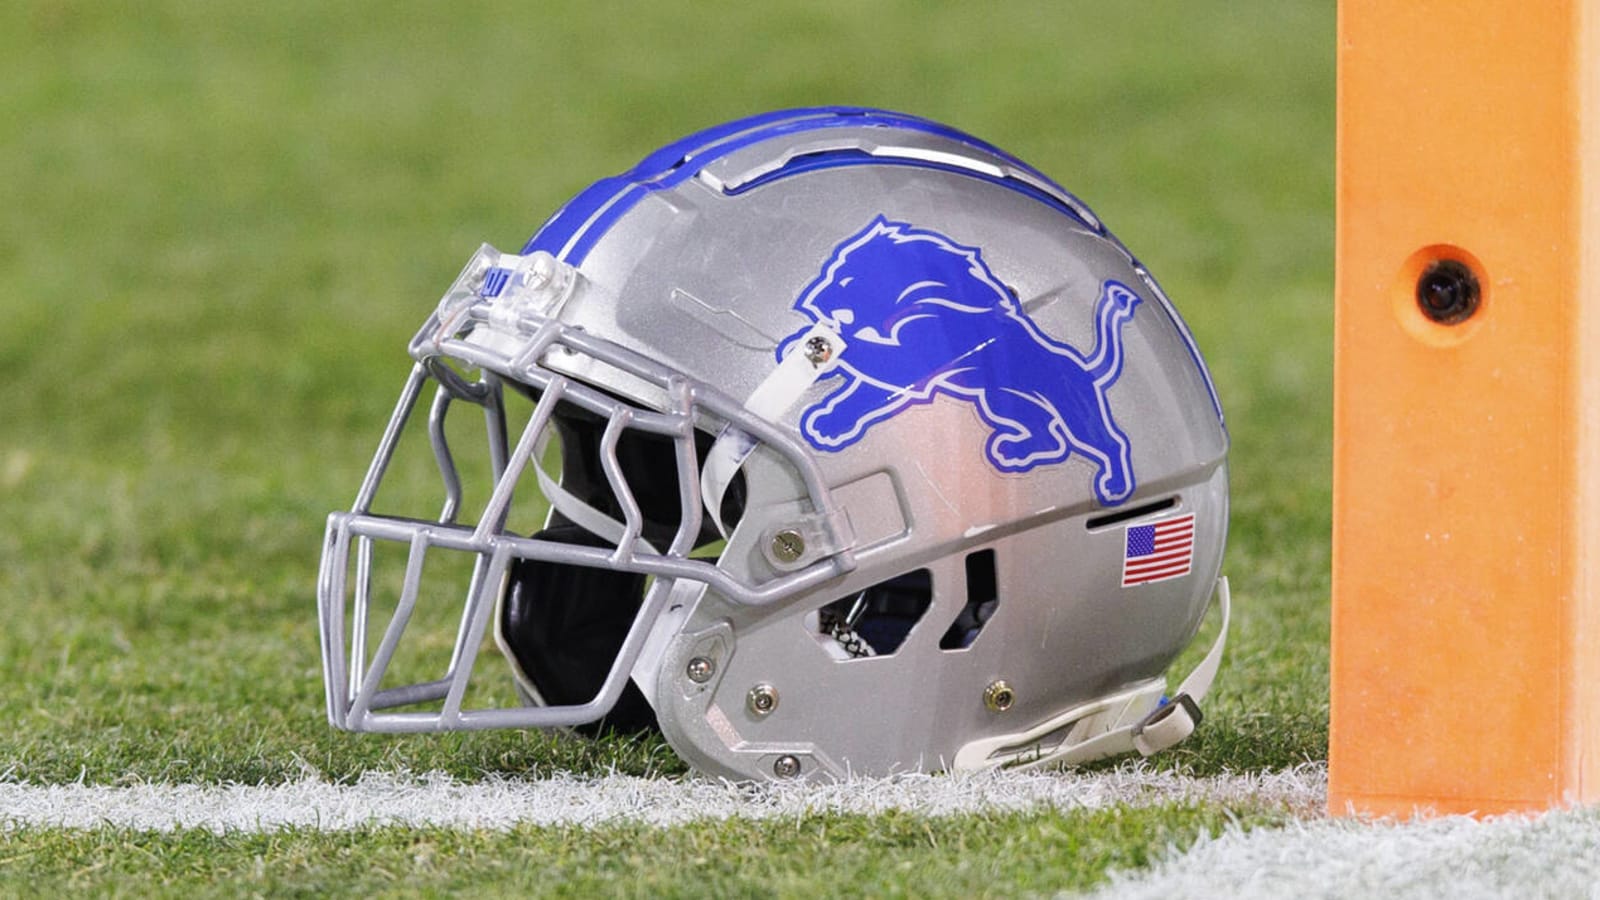 Twitter had some strong reactions to new Lions helmets